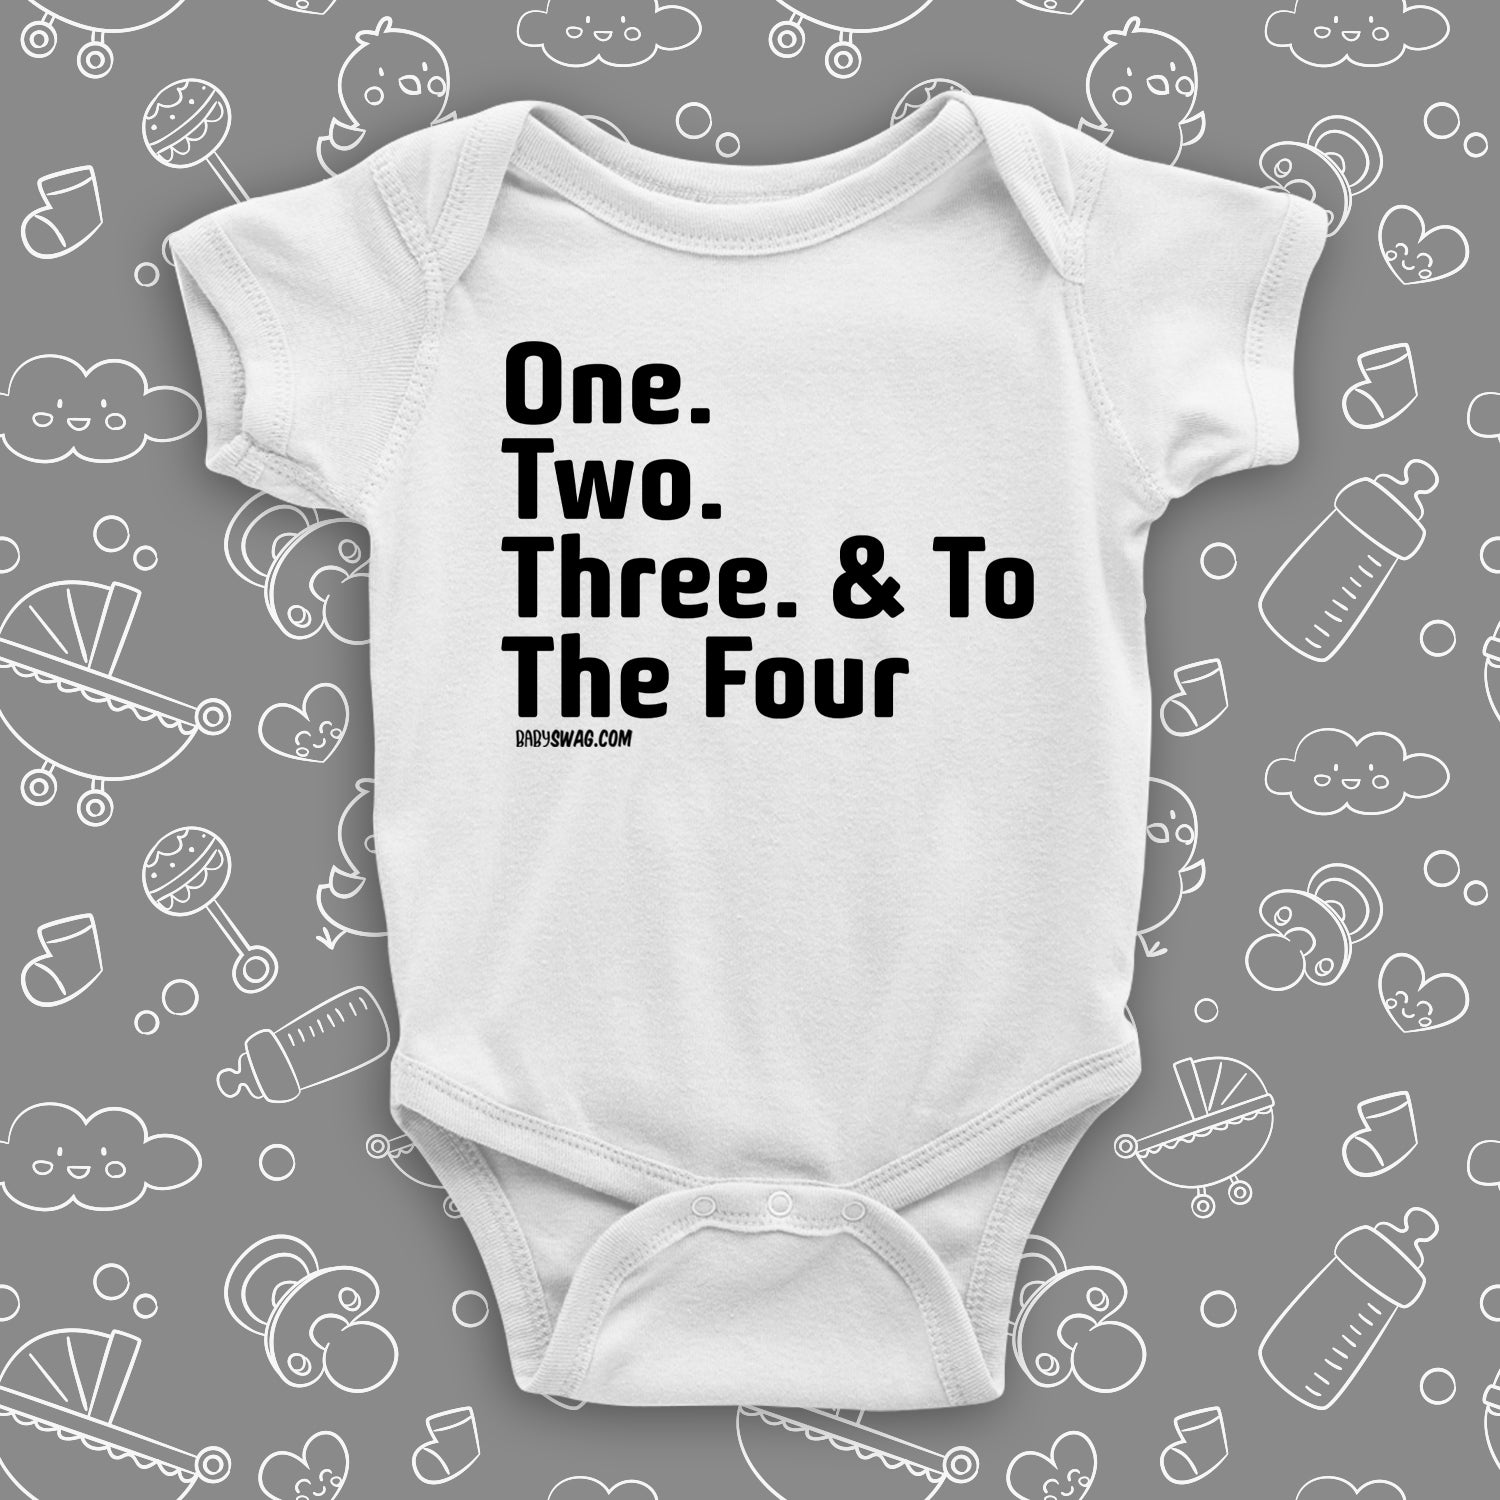 Cute baby onesies with saying "One Two Three & To The Four" in white.